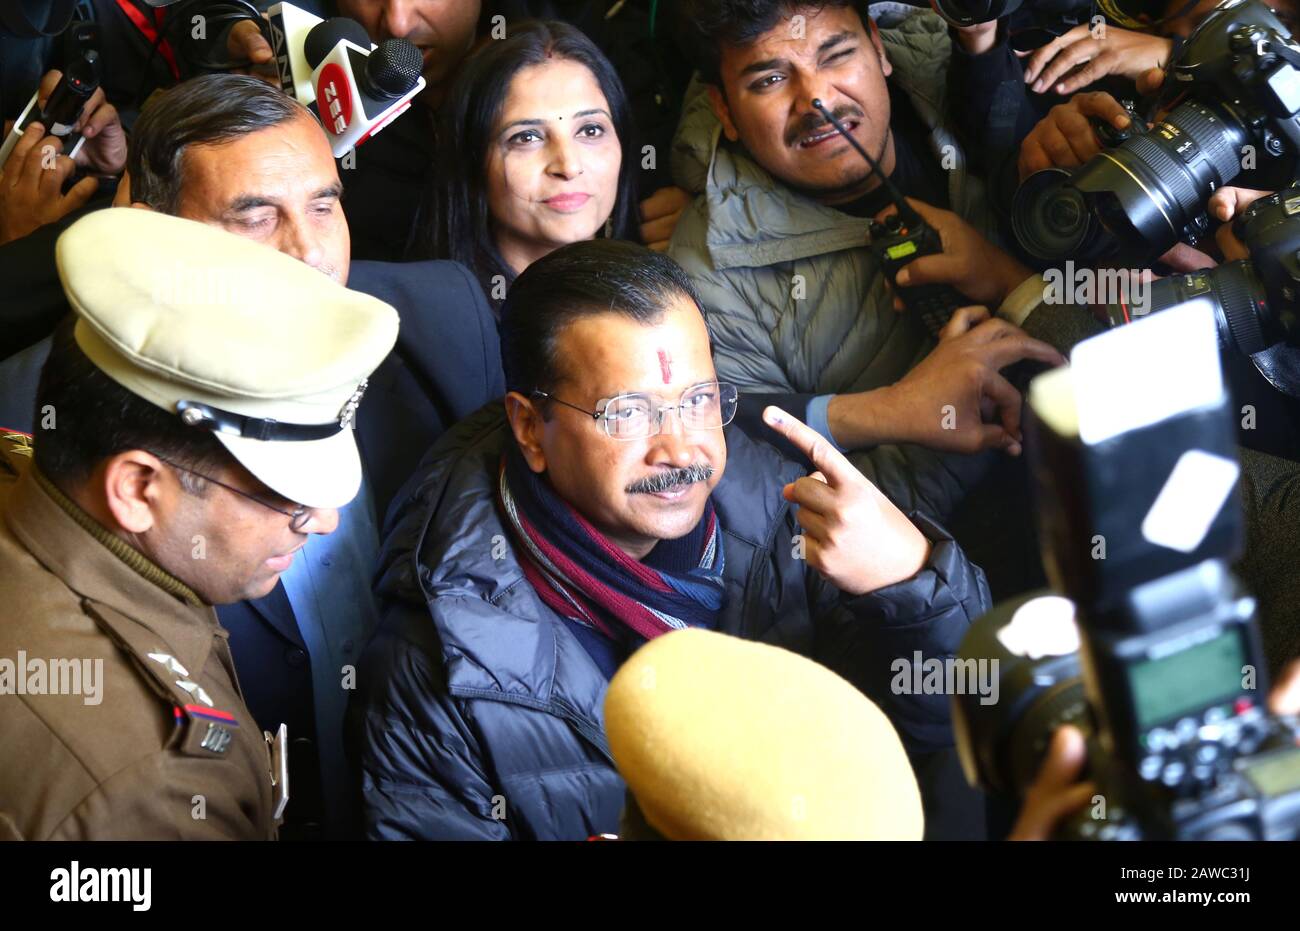 New Delhi, India. 8th Feb, 2020. Delhi Chief Minister Arvind Kejriwal (C) is surrounded by media workers and police personnel as he shows his finger marked with ink after casting his vote in New Delhi, India, Feb. 8, 2020. Voting for the local elections in the Indian capital began Saturday morning amid tight security and adequate arrangements, officials said. Credit: Str/Xinhua/Alamy Live News Stock Photo